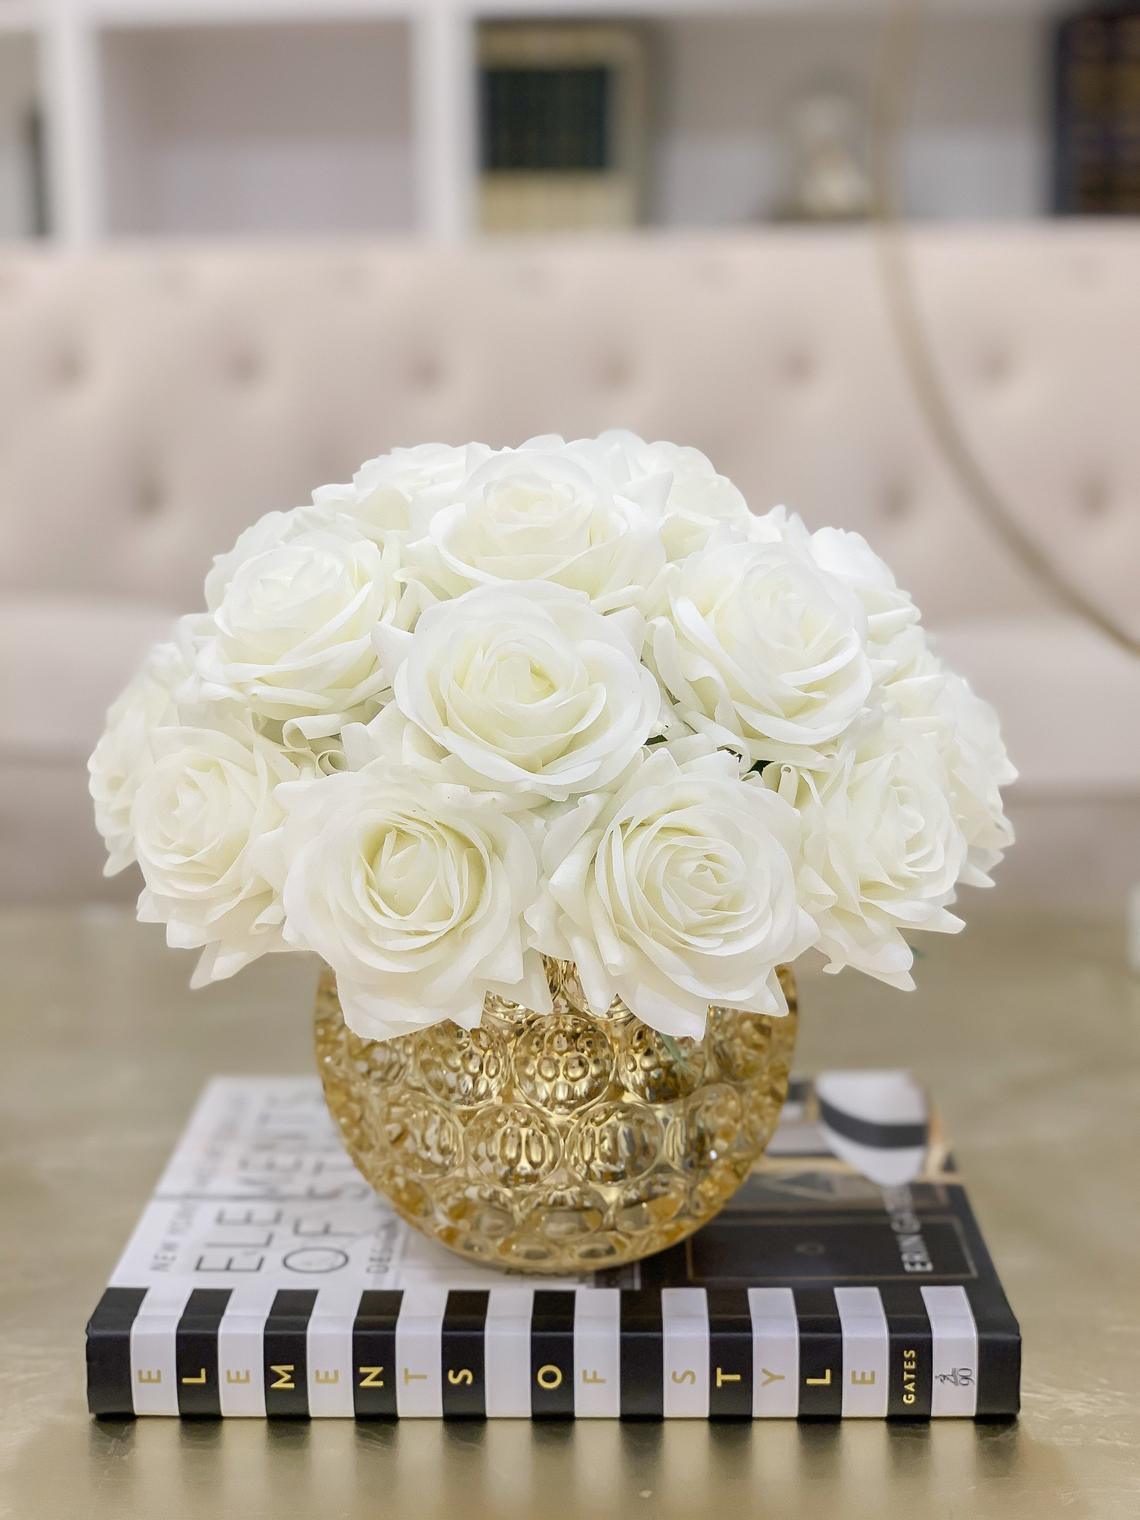 Large Rose Centerpiece in Gold Vase - Flovery